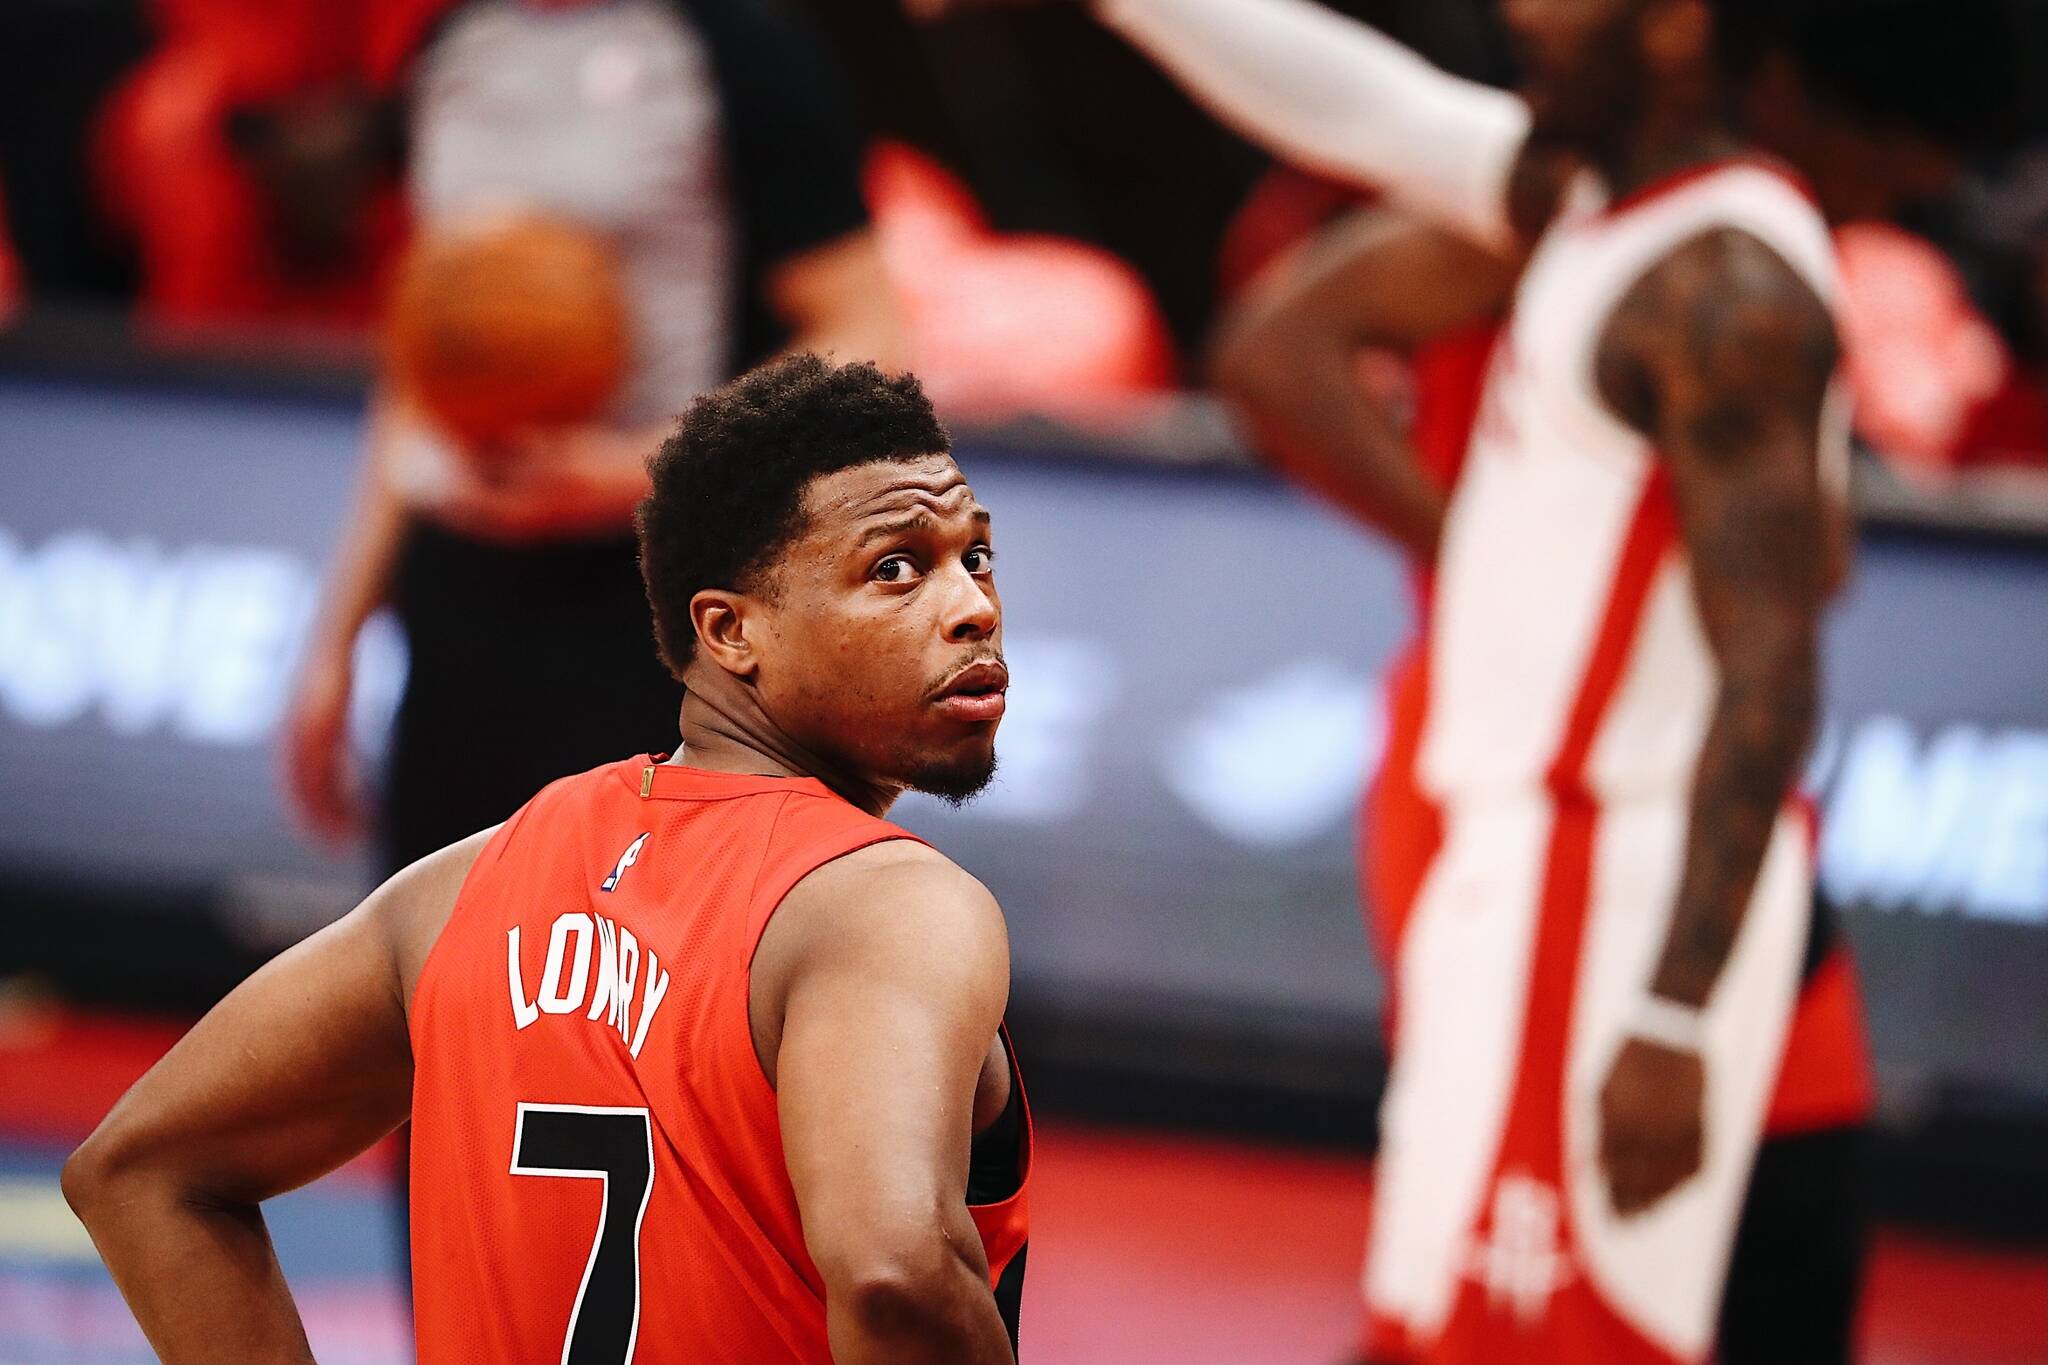 Kyle Lowry says when he retires it will be as a Toronto Raptor